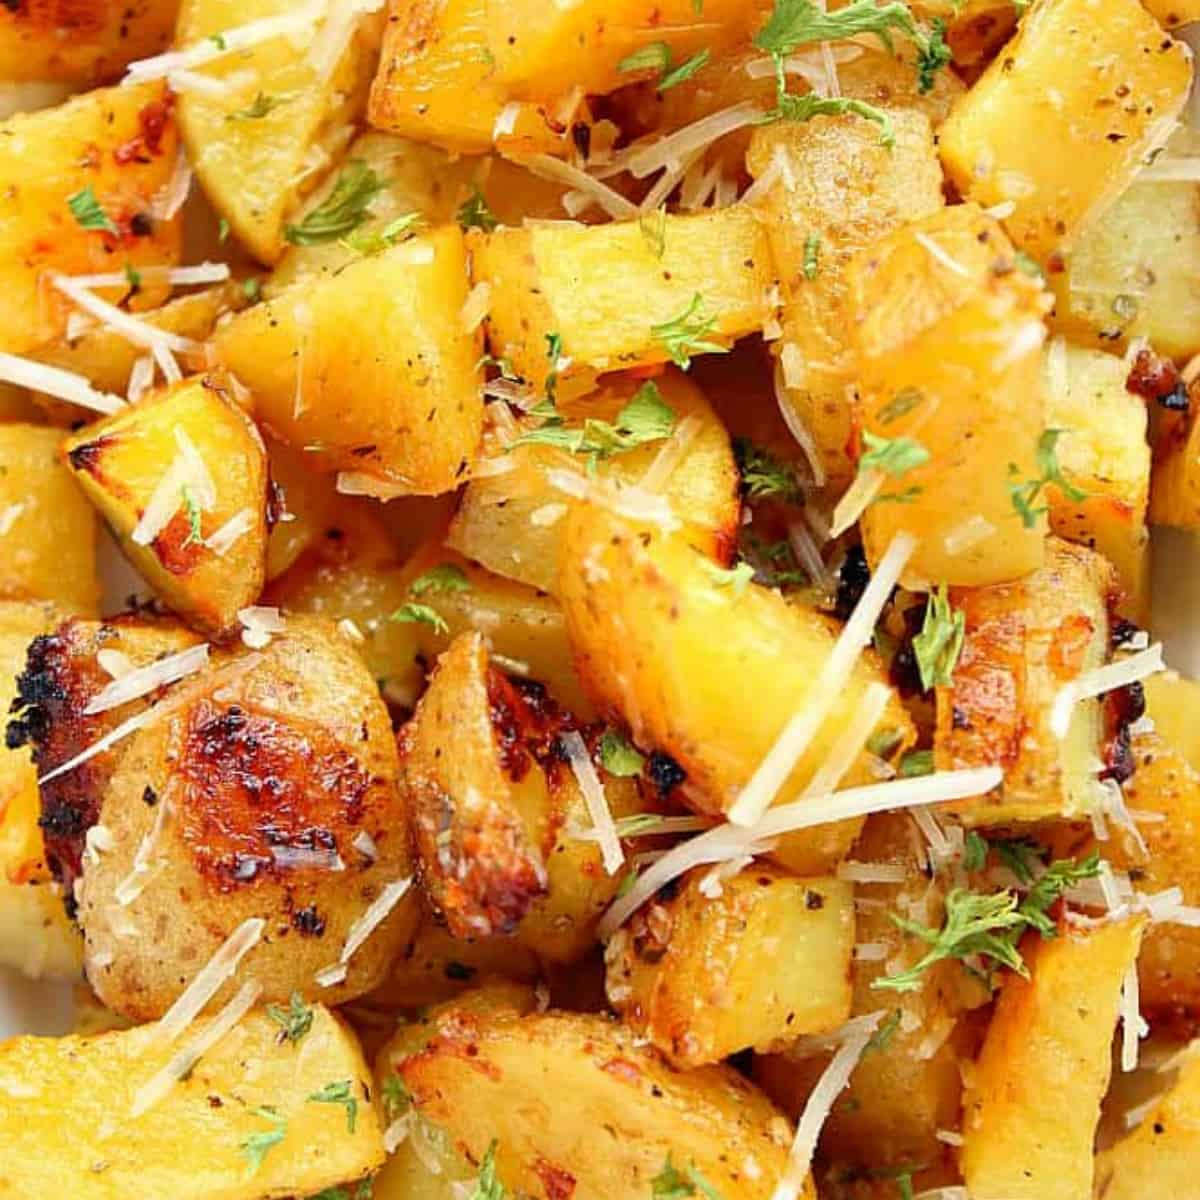 Roasted potatoes with Parmesan.